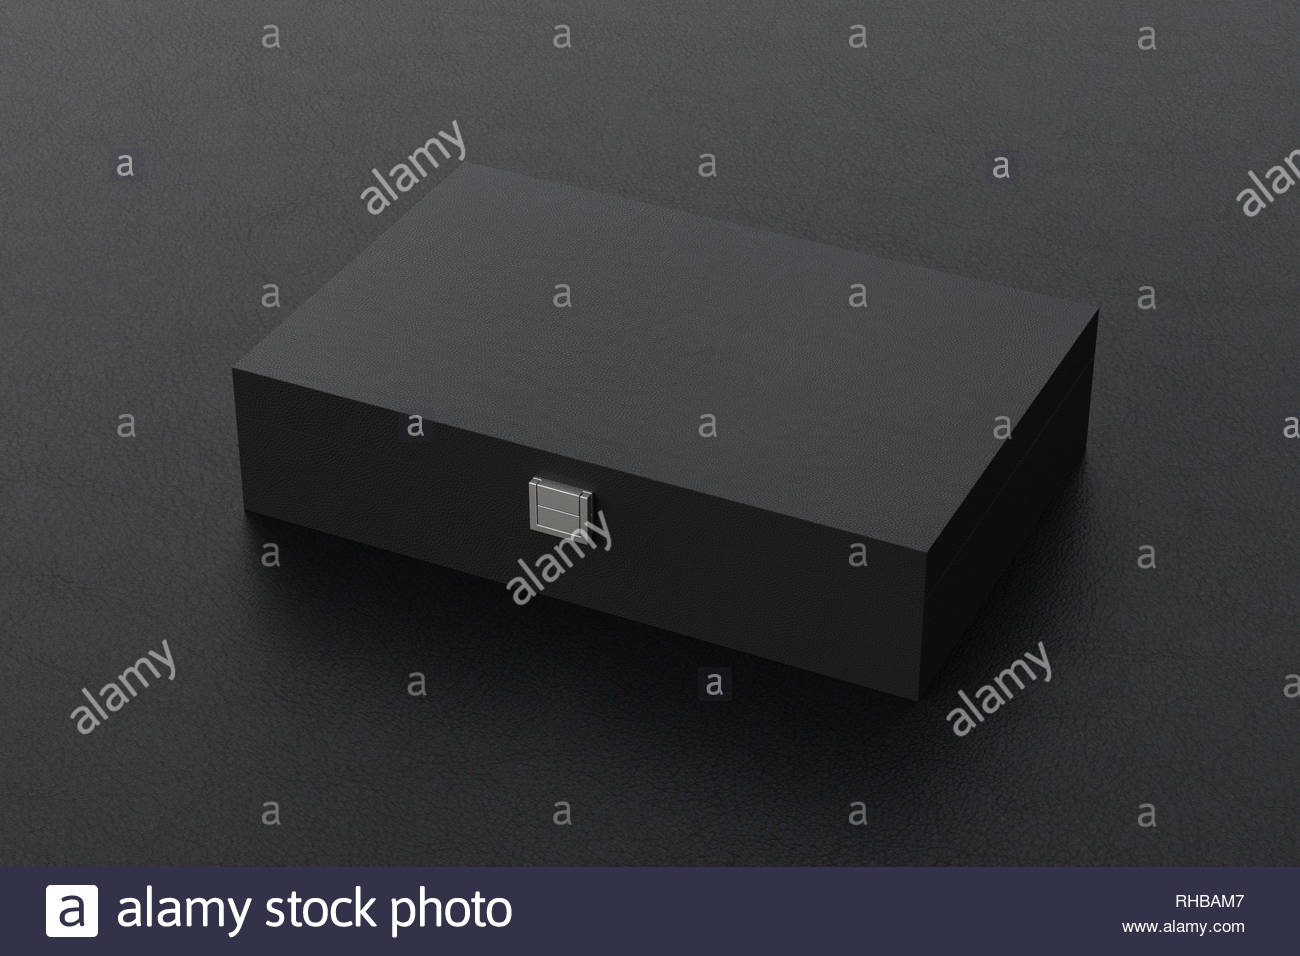 Black Closed Long Box Or Casket On Background 3d